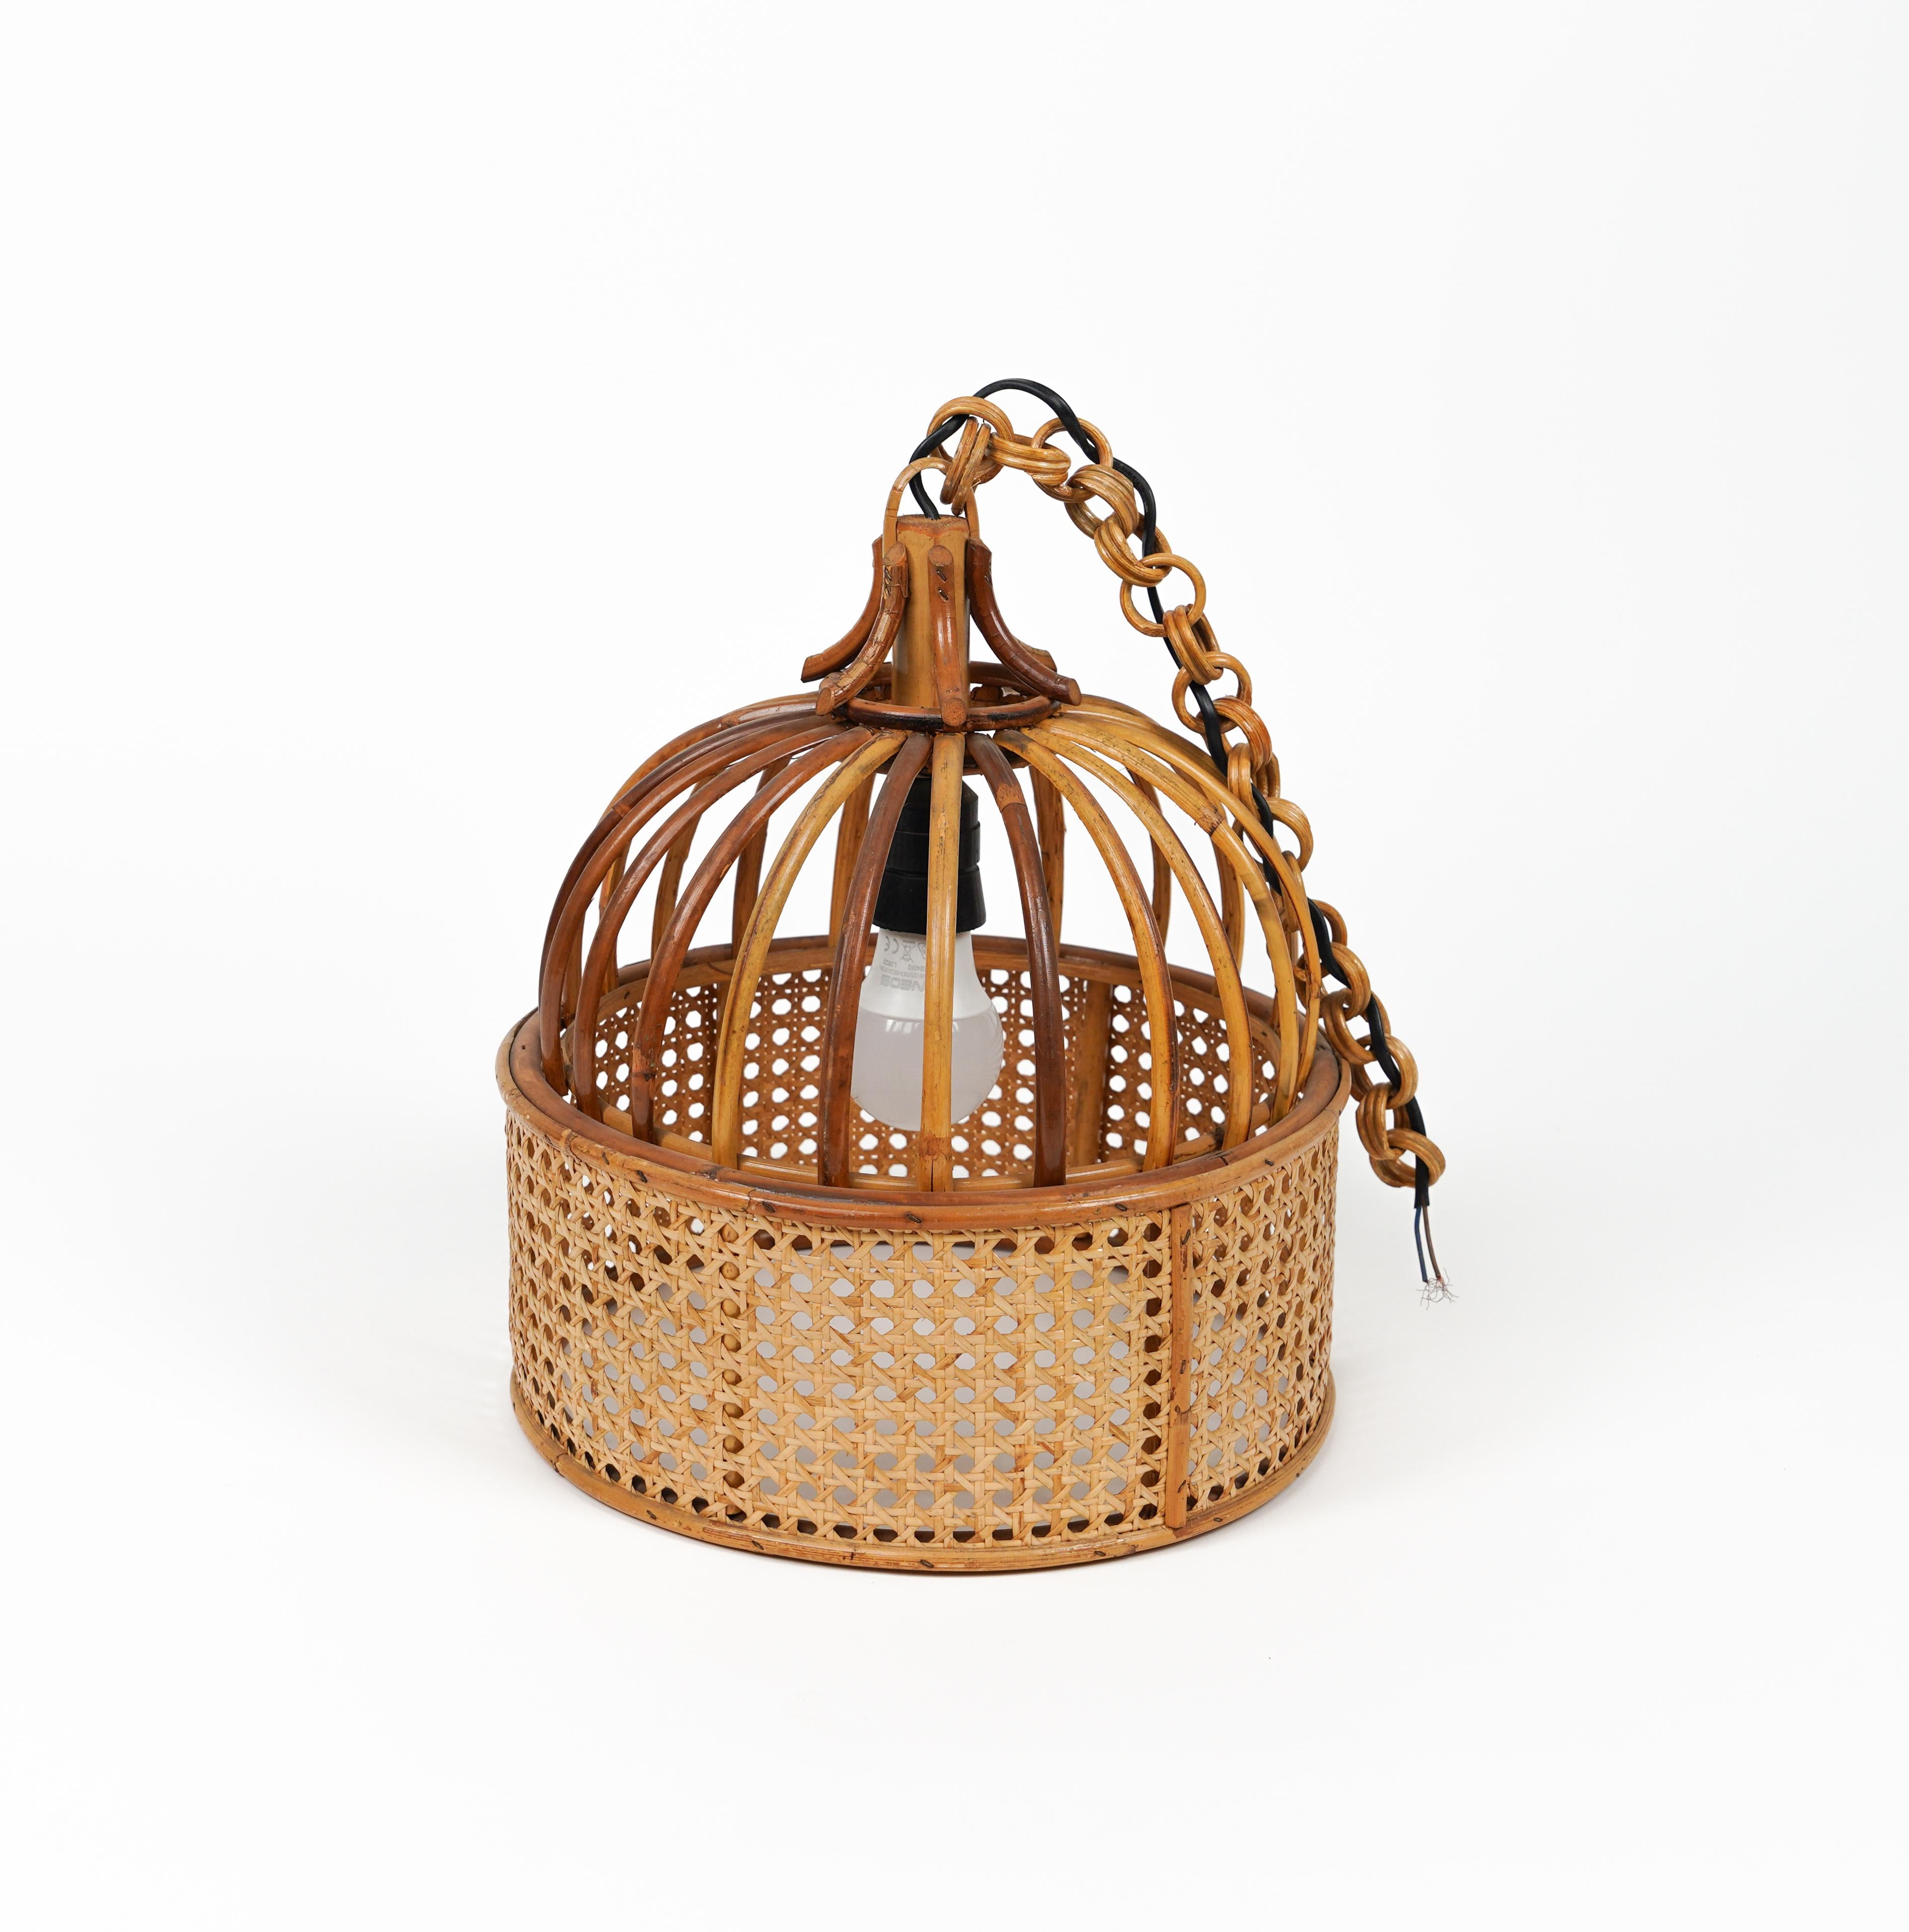 Midcentury French Riviera Rattan and Wicker Chandelier, Italy 1970s For Sale 2